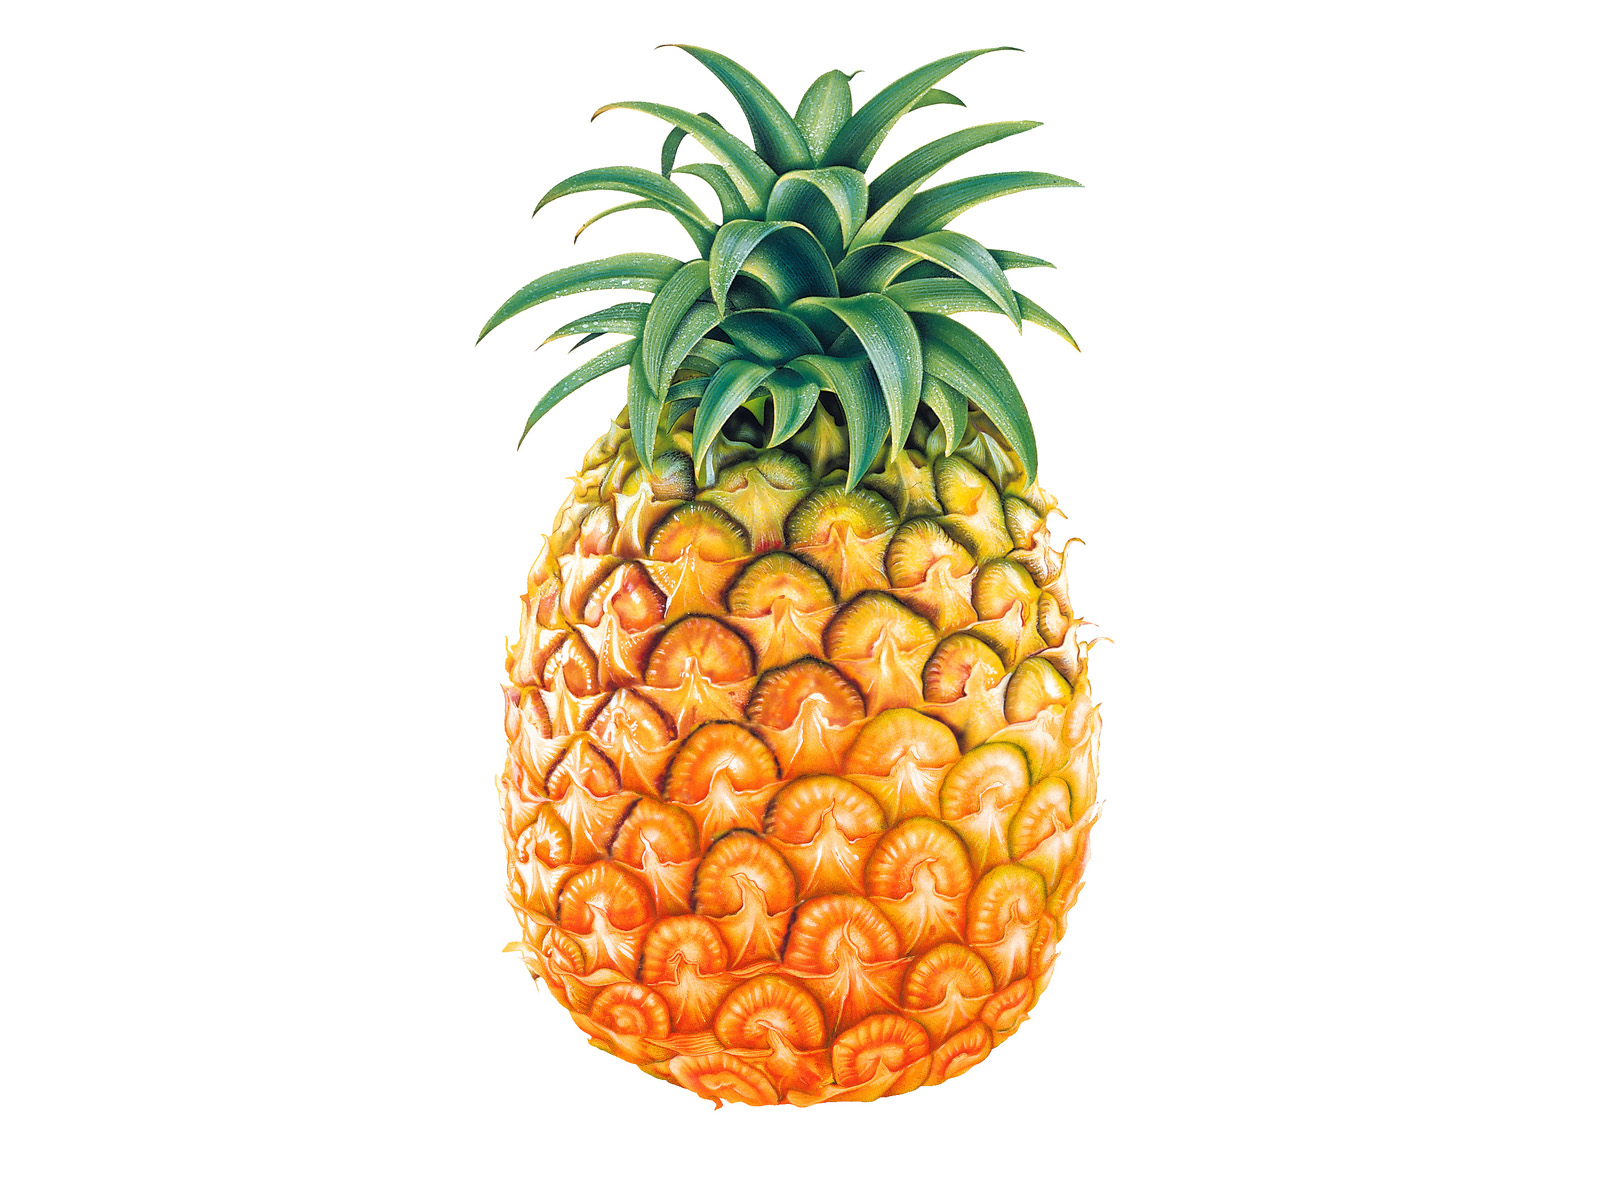 The pineapple is an international symbol of warmth and welcome